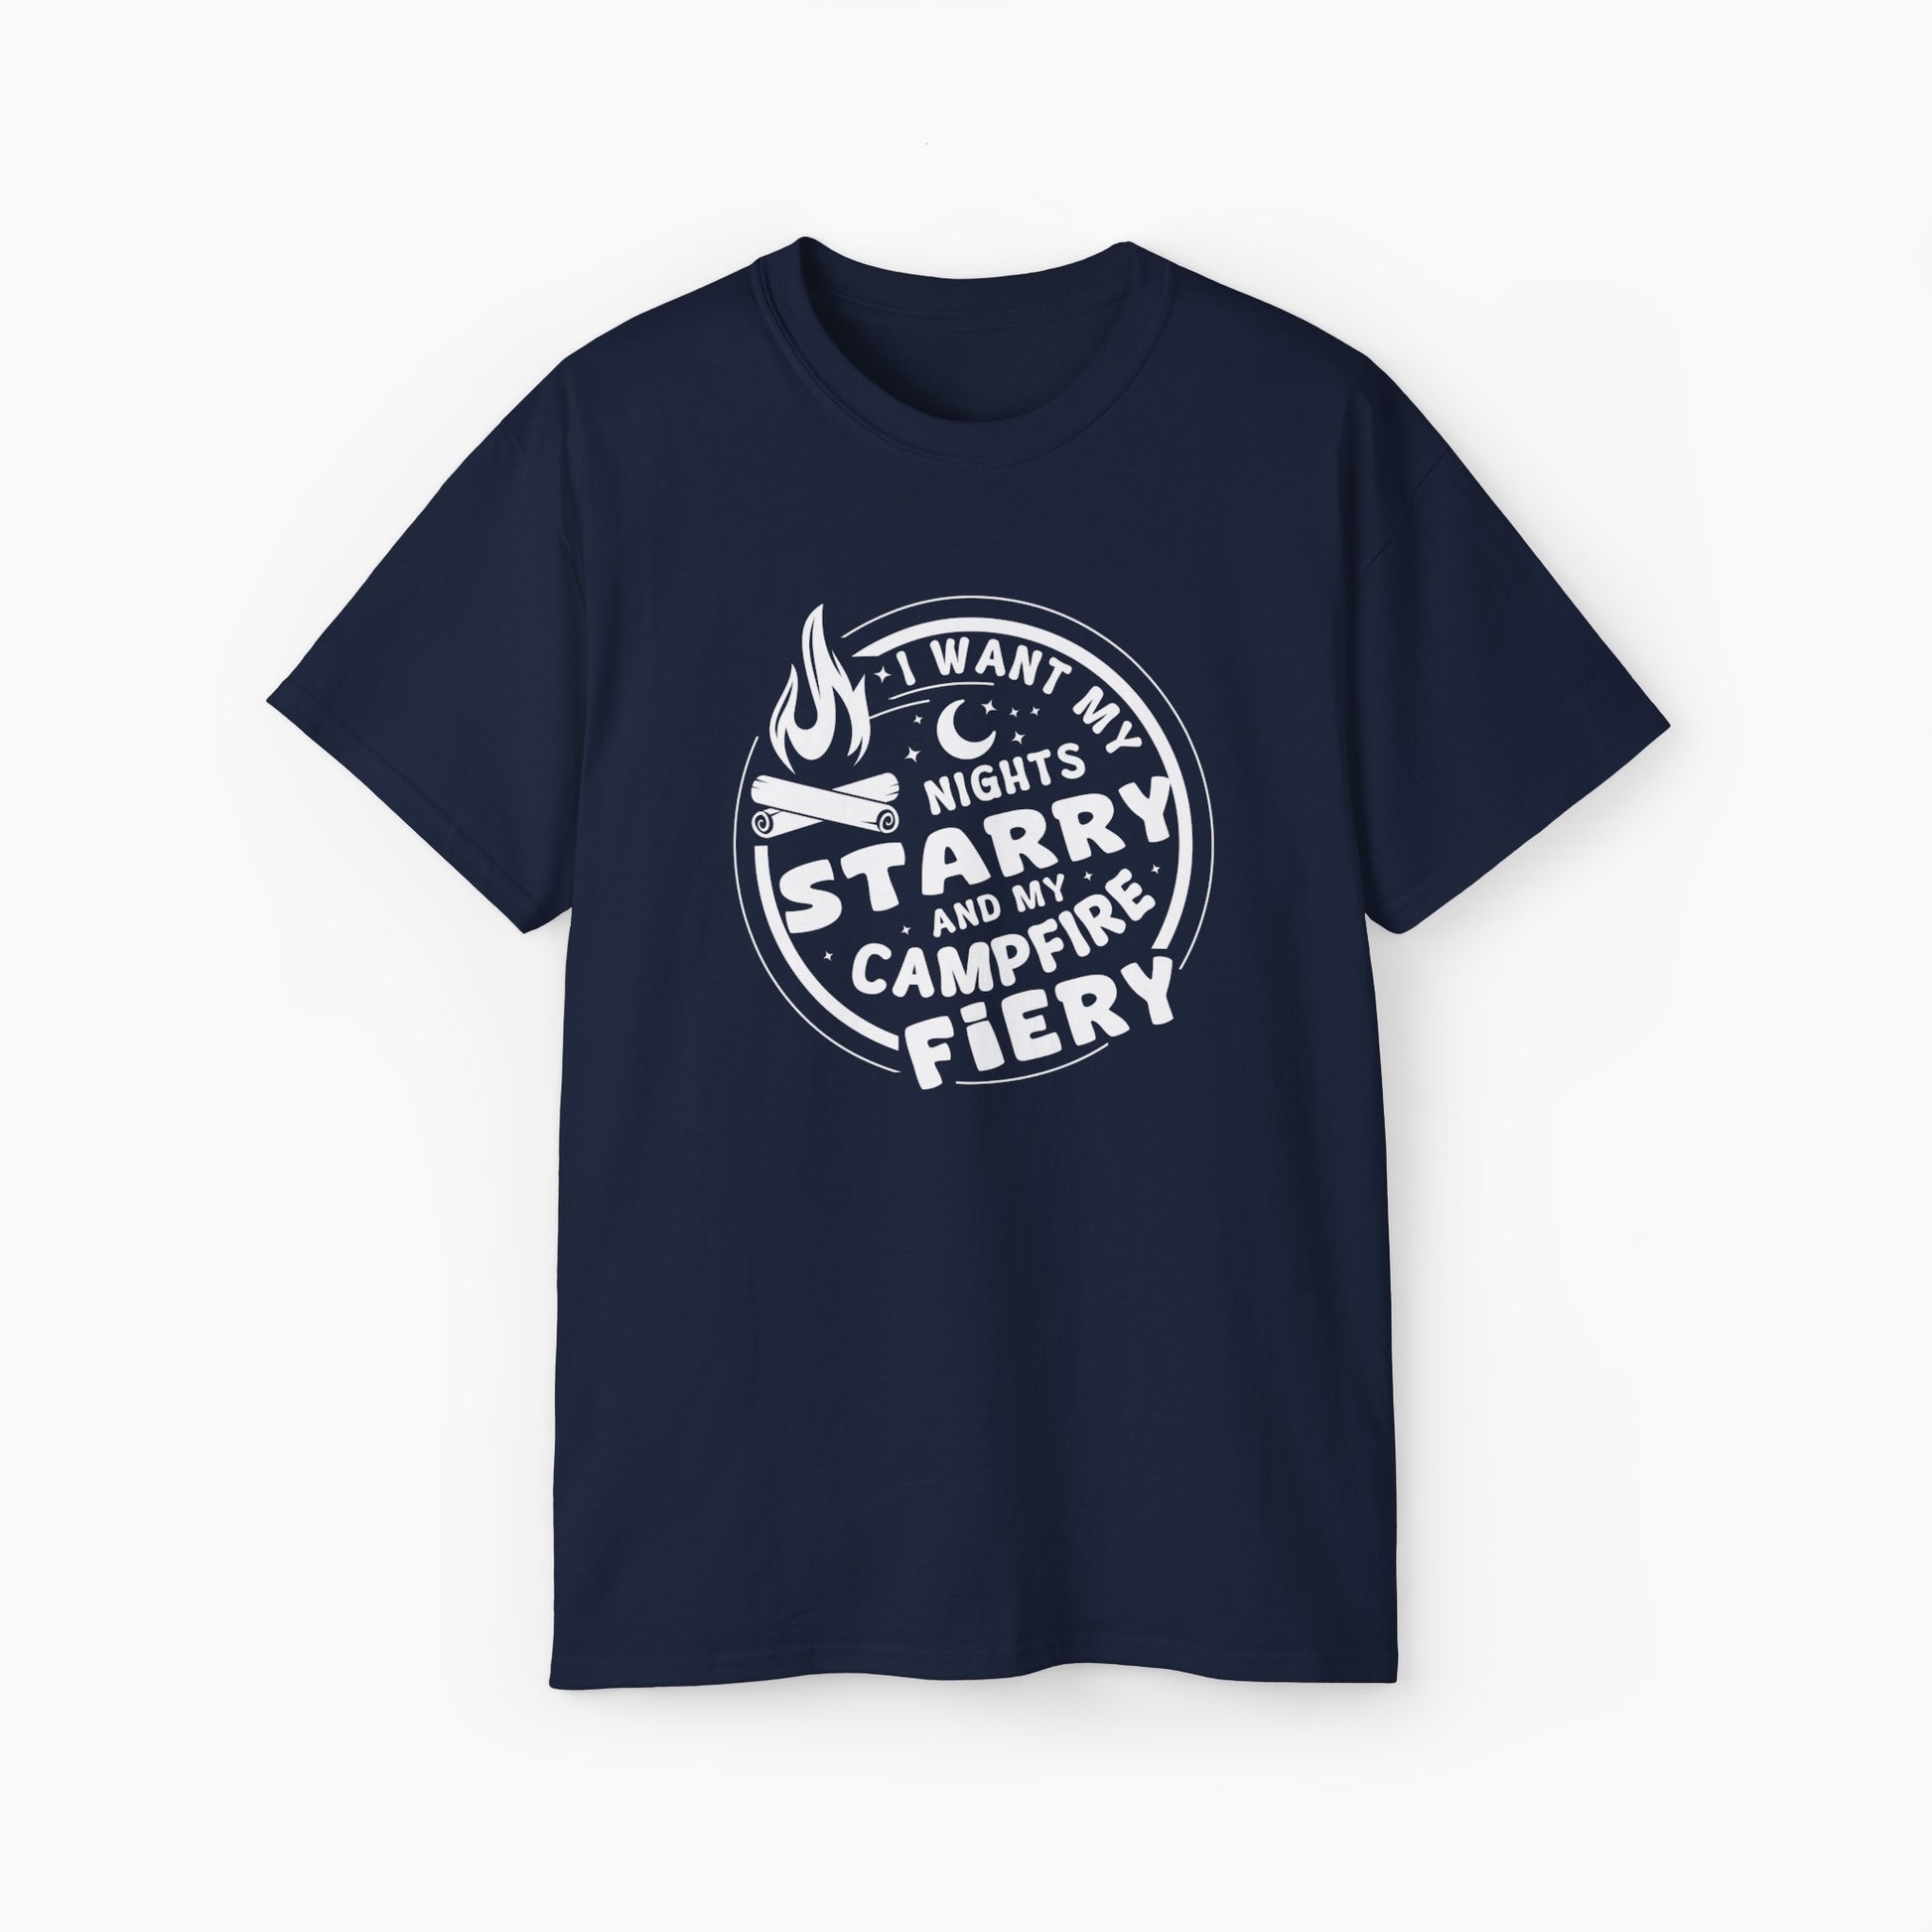 Dark blue t-shirt with the text 'I want my nights starry and my campfire fiery' in a circular design, featuring a campfire, stars, and moon on a plain background.